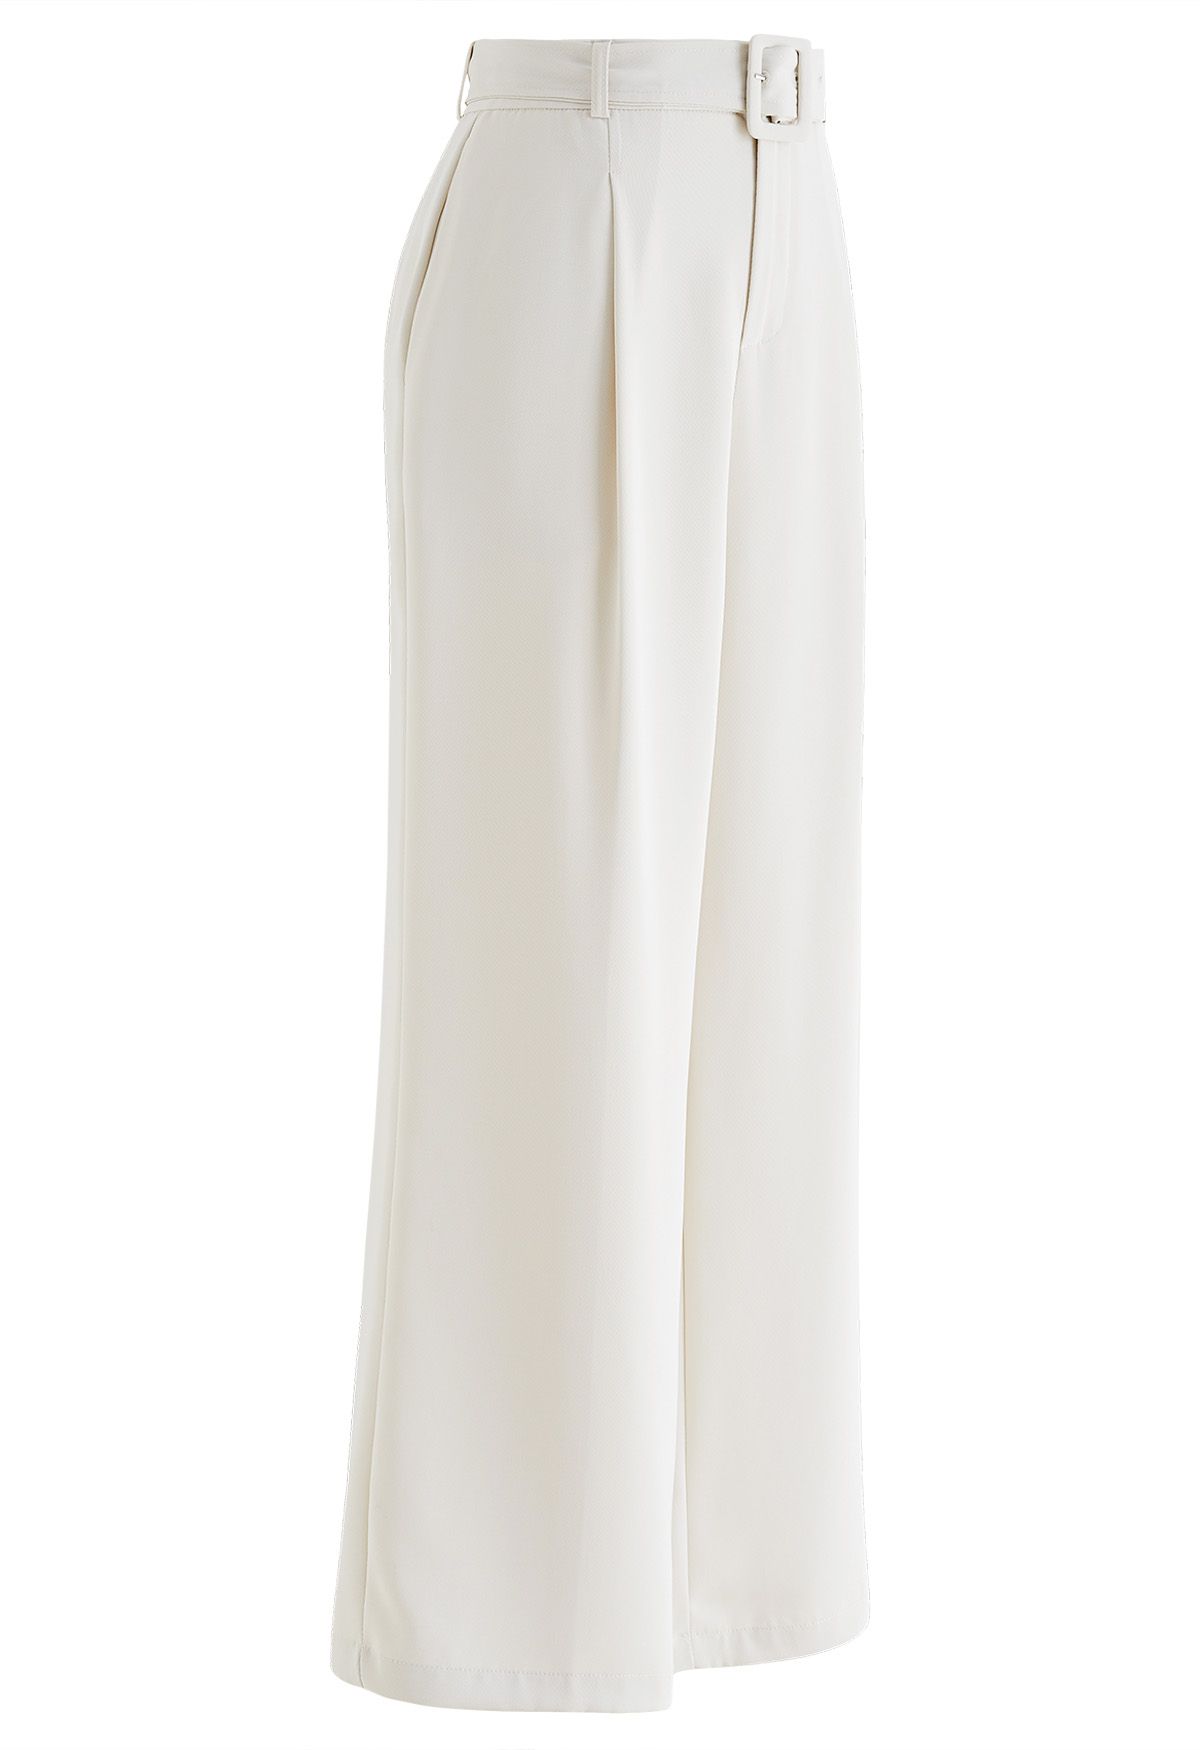 Sleek Belted Straight-Leg Pants in Ivory - Retro, Indie and Unique Fashion